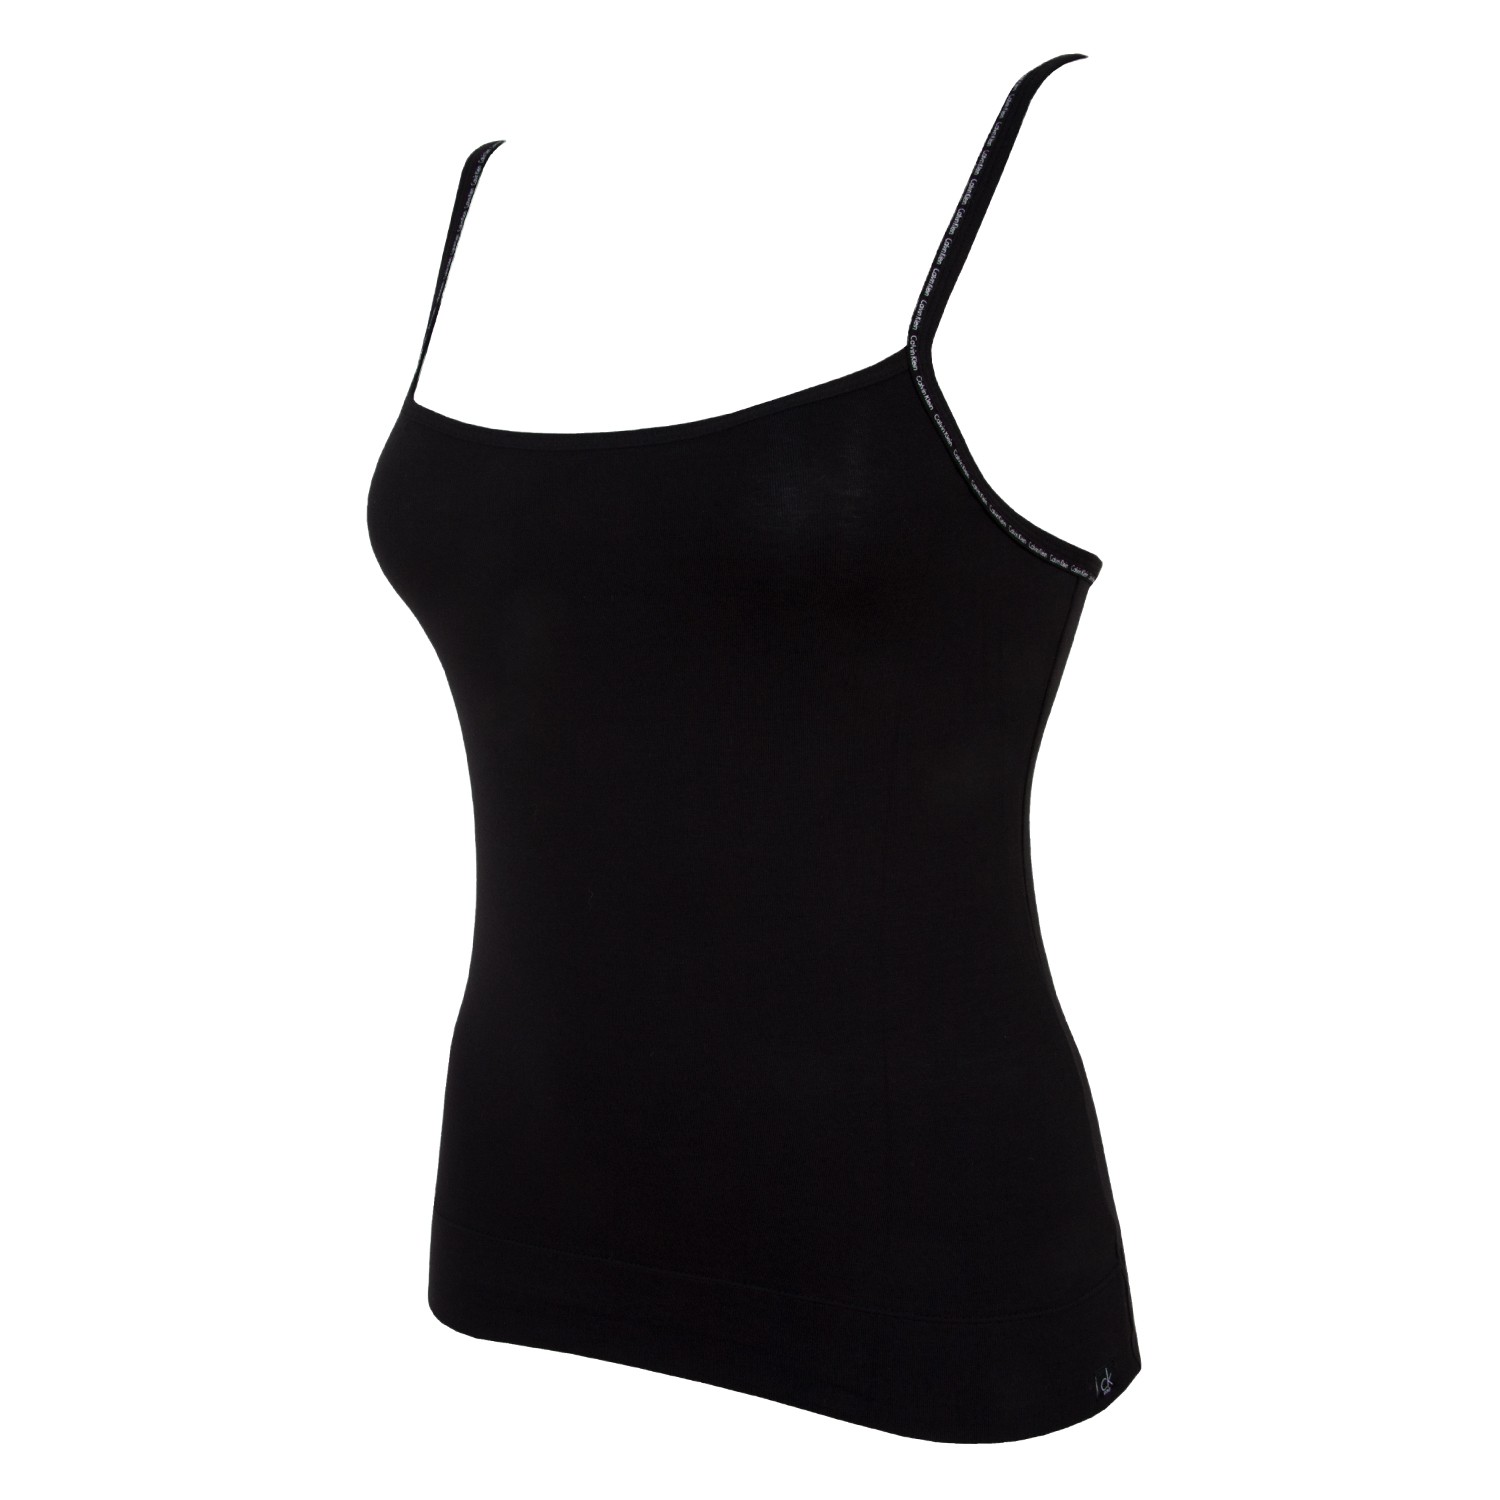 CK One Cotton Camisole W/O Shelf - Tops/tanks - Clothing - Timarco.co.uk